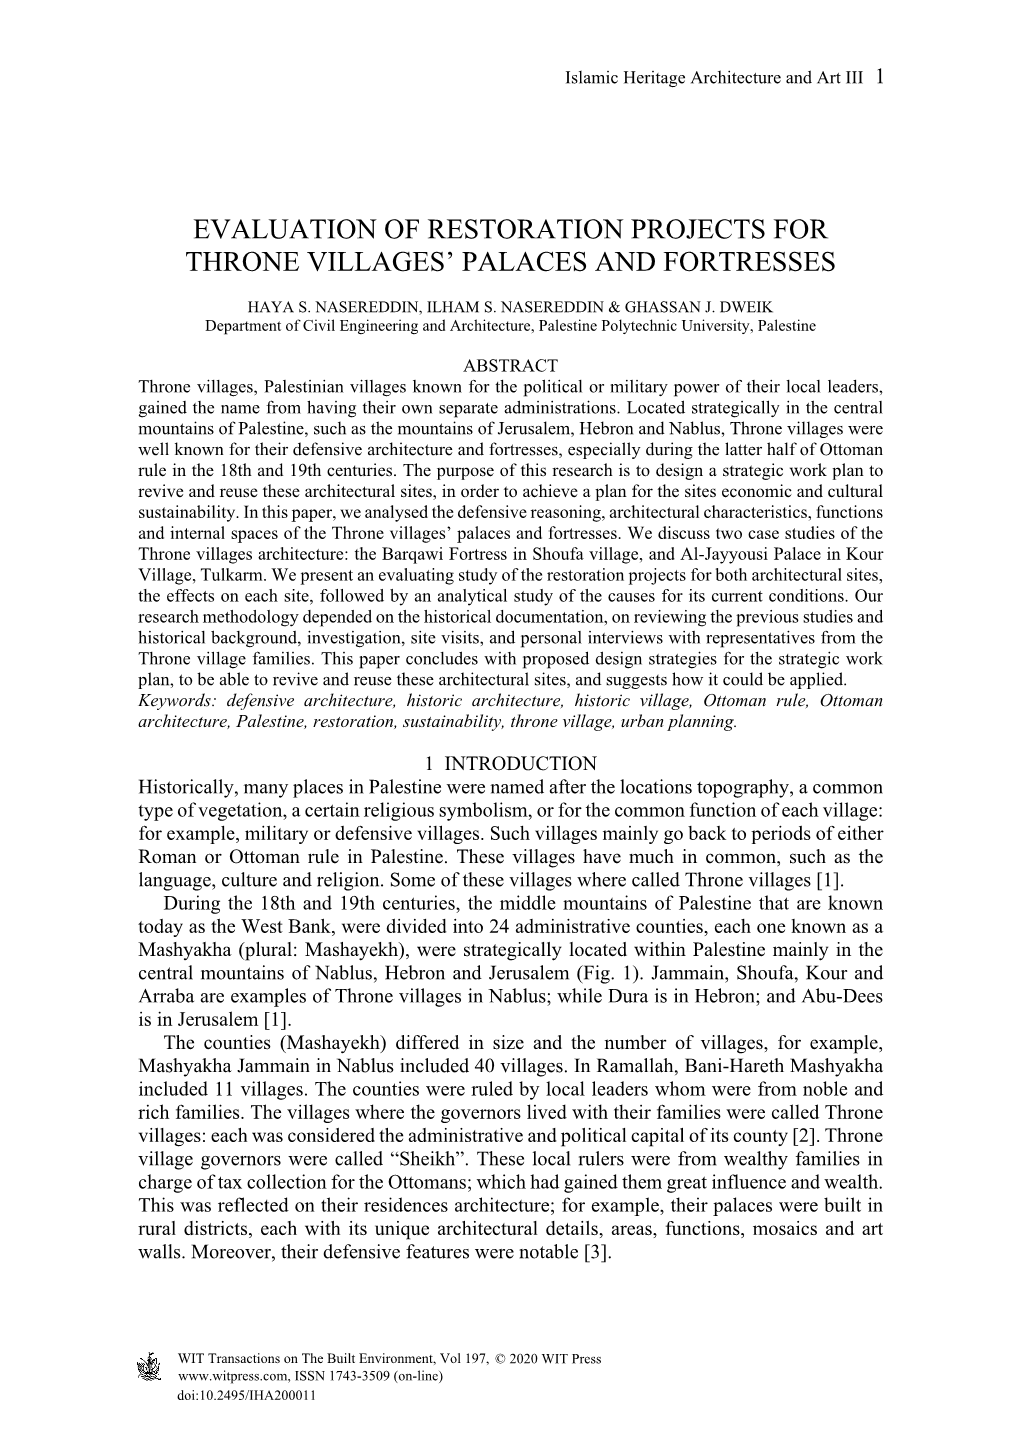 Evaluation of Restoration Projects for Throne Villages’ Palaces and Fortresses